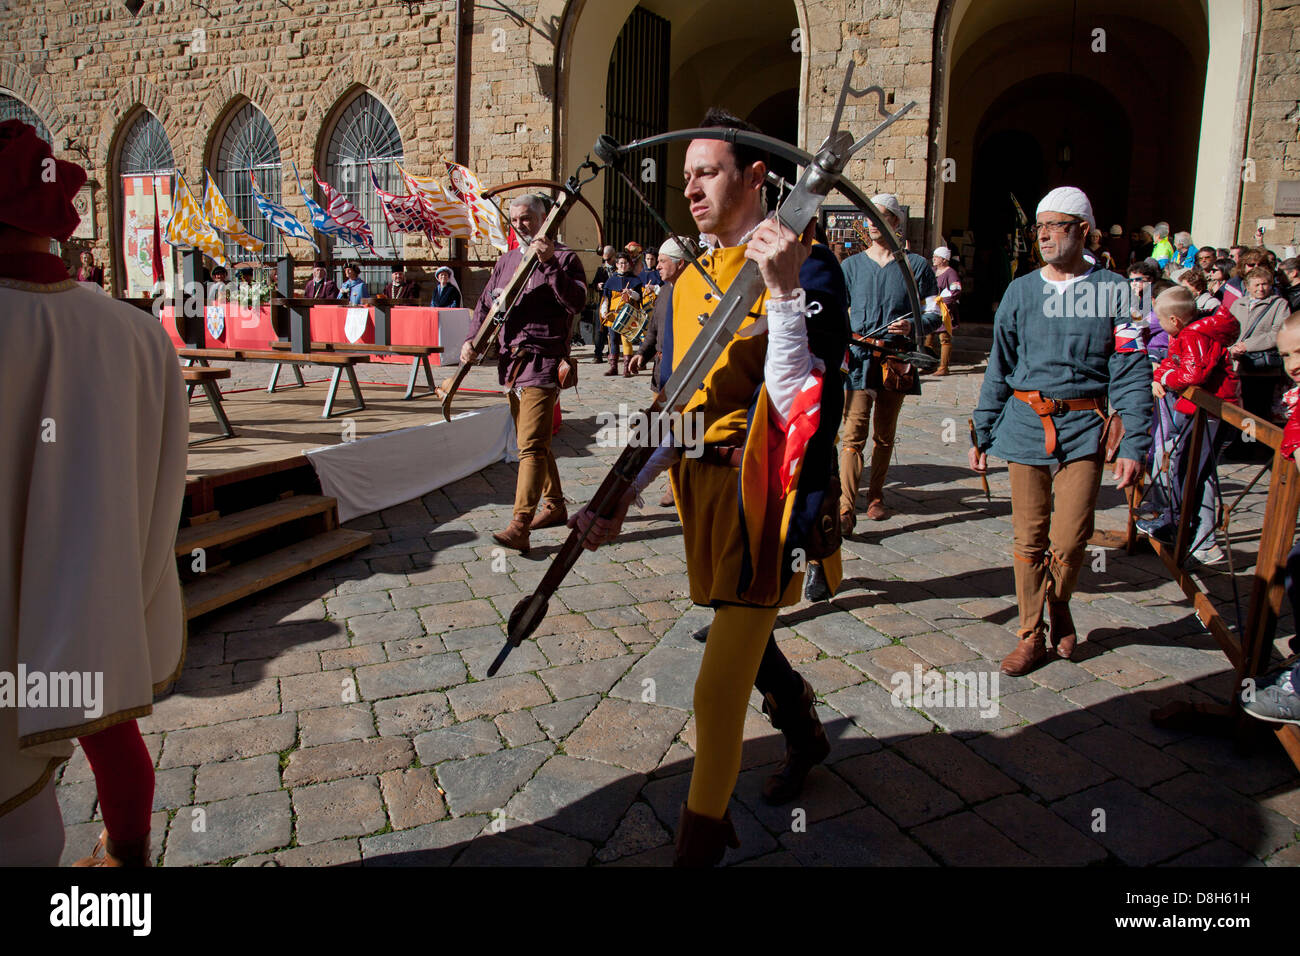 [Image: local-people-in-medieval-costumes-during...D8H61H.jpg]